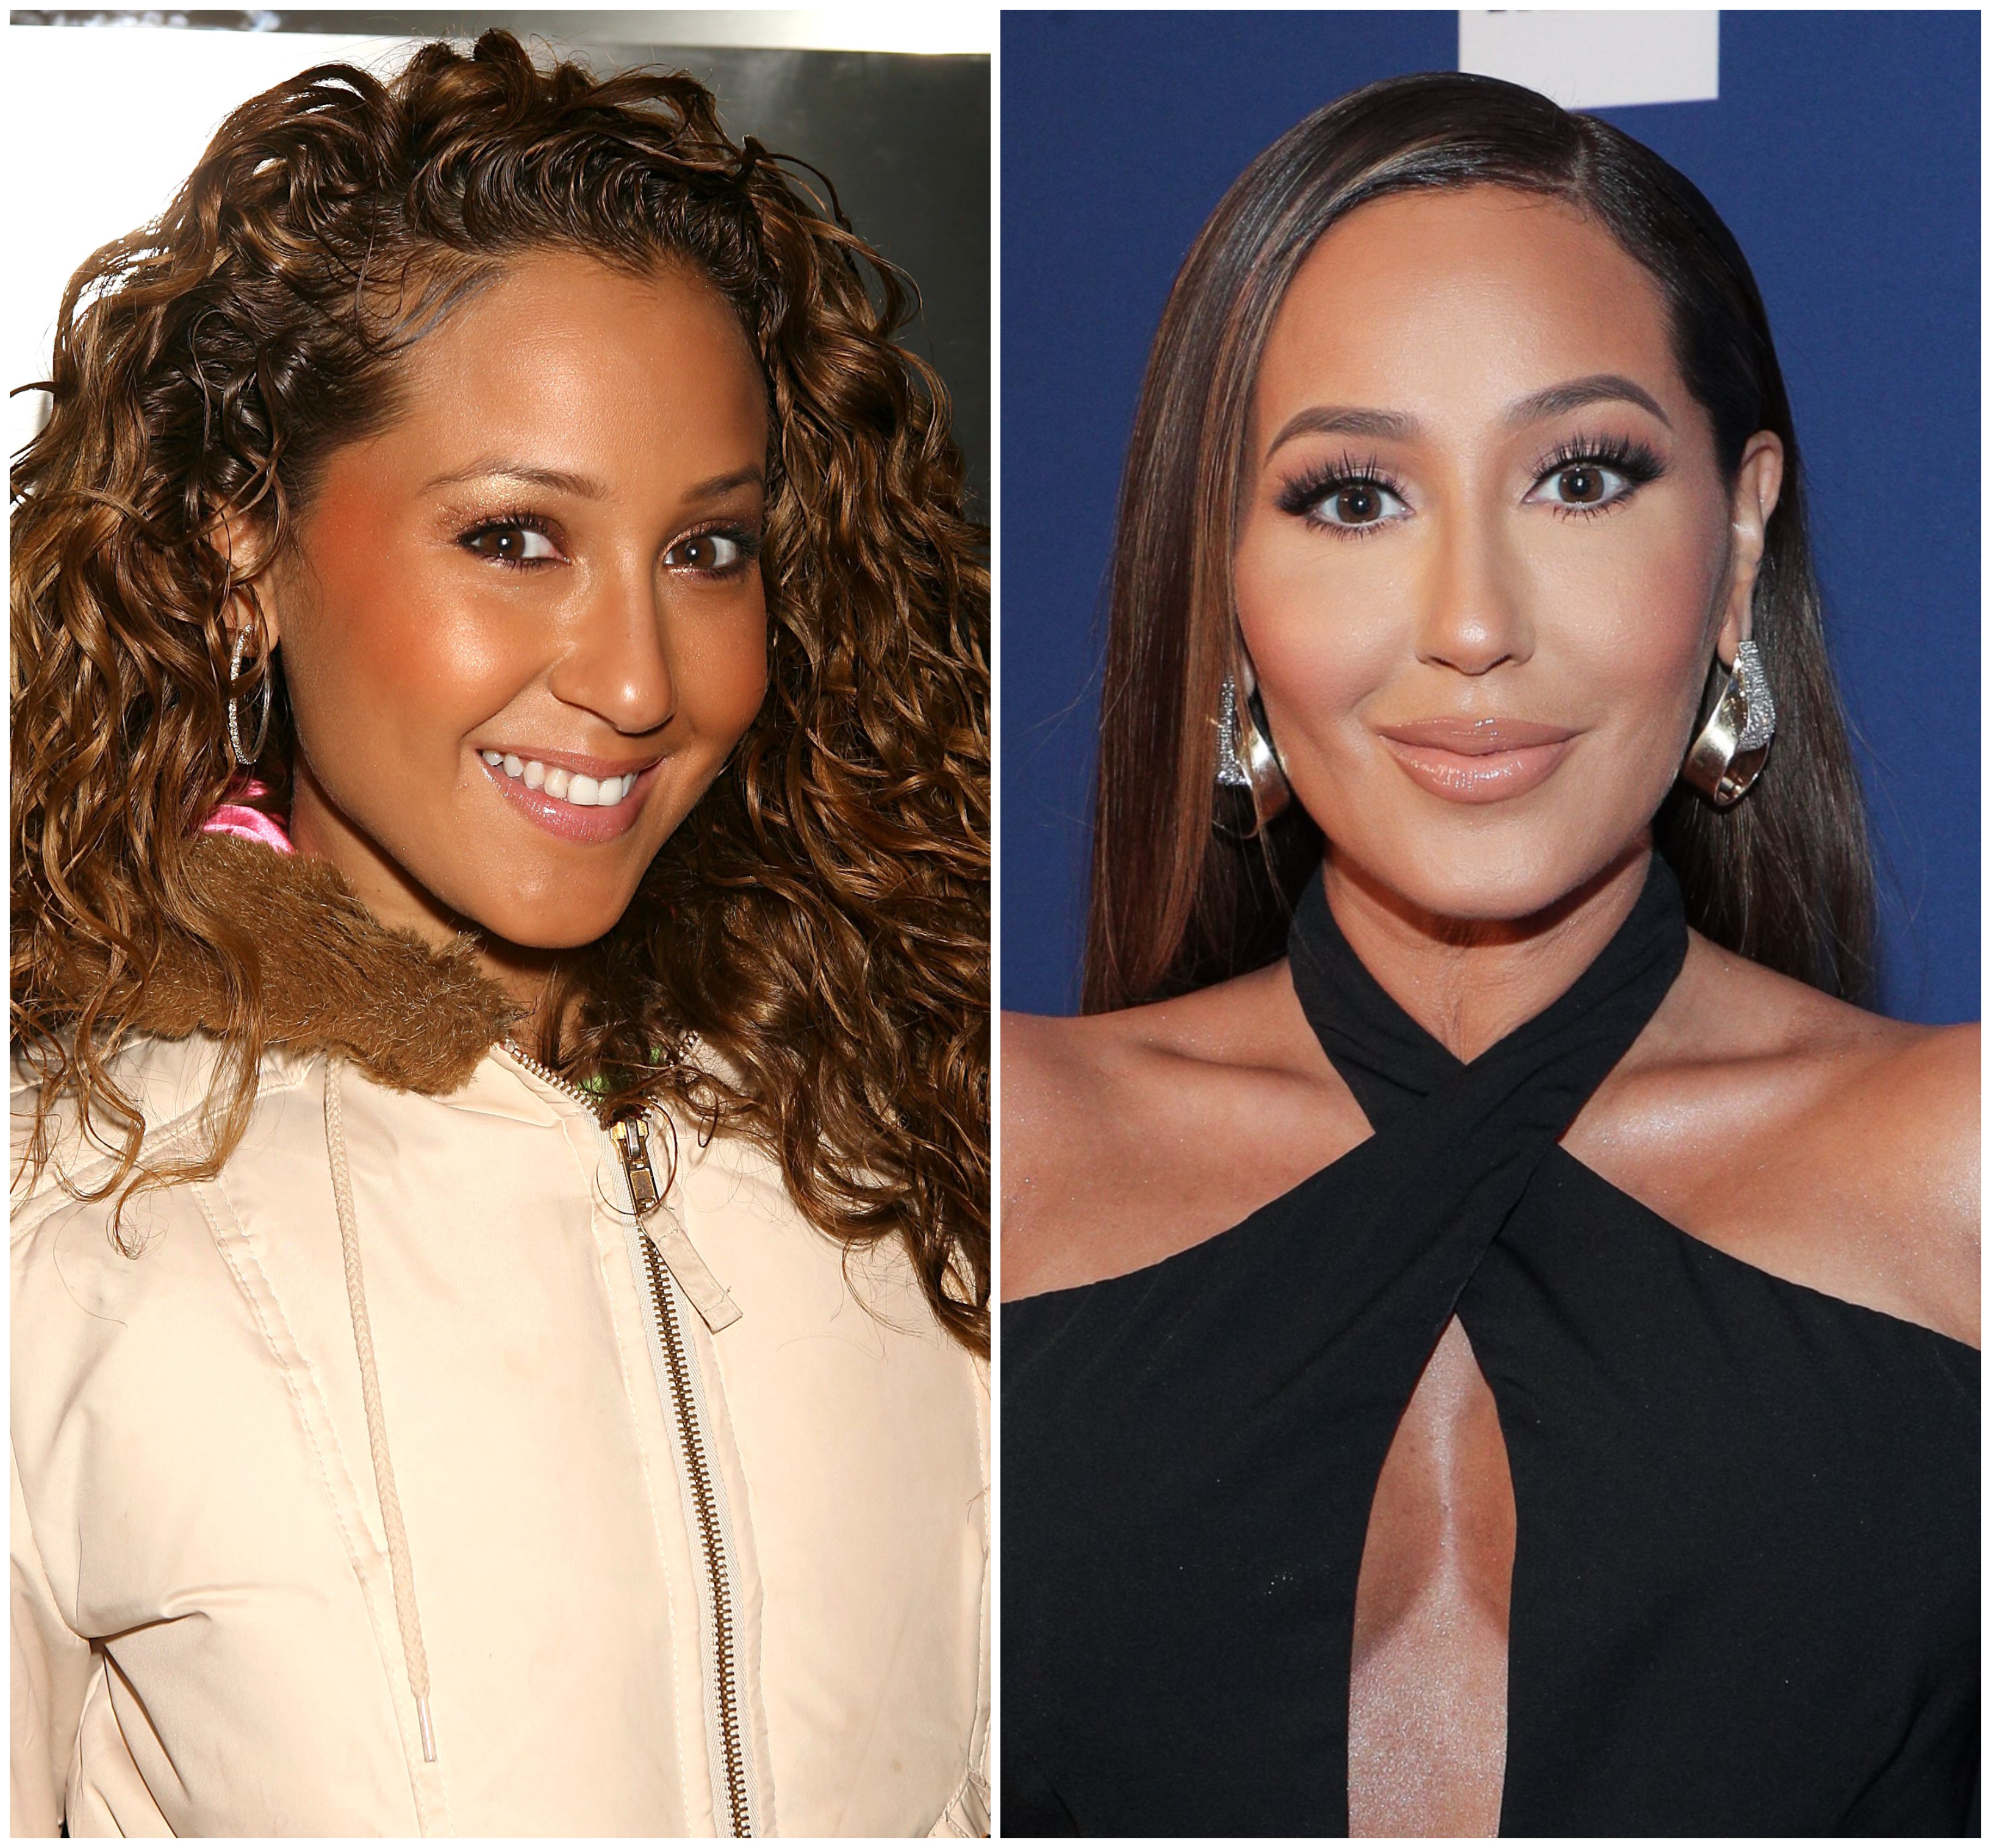 Adrienne Bailon Before and After Photos ...